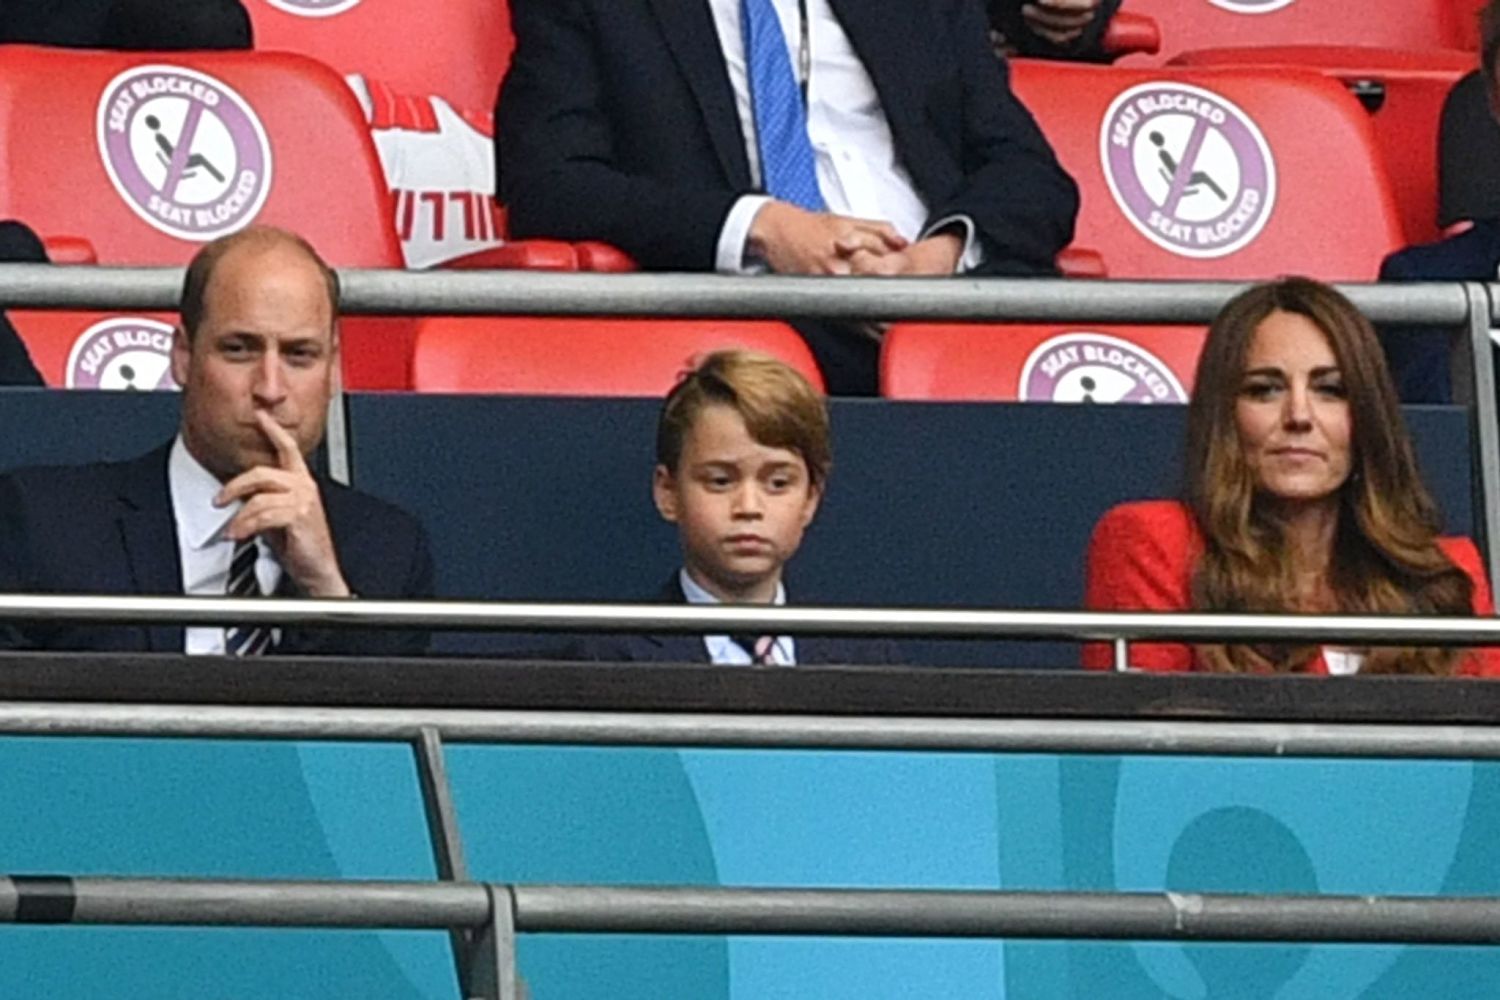 Prince William with his hand on his chin, wearing a suit, sits next to Prince George and Kate Middleton as they watch a soccer game.